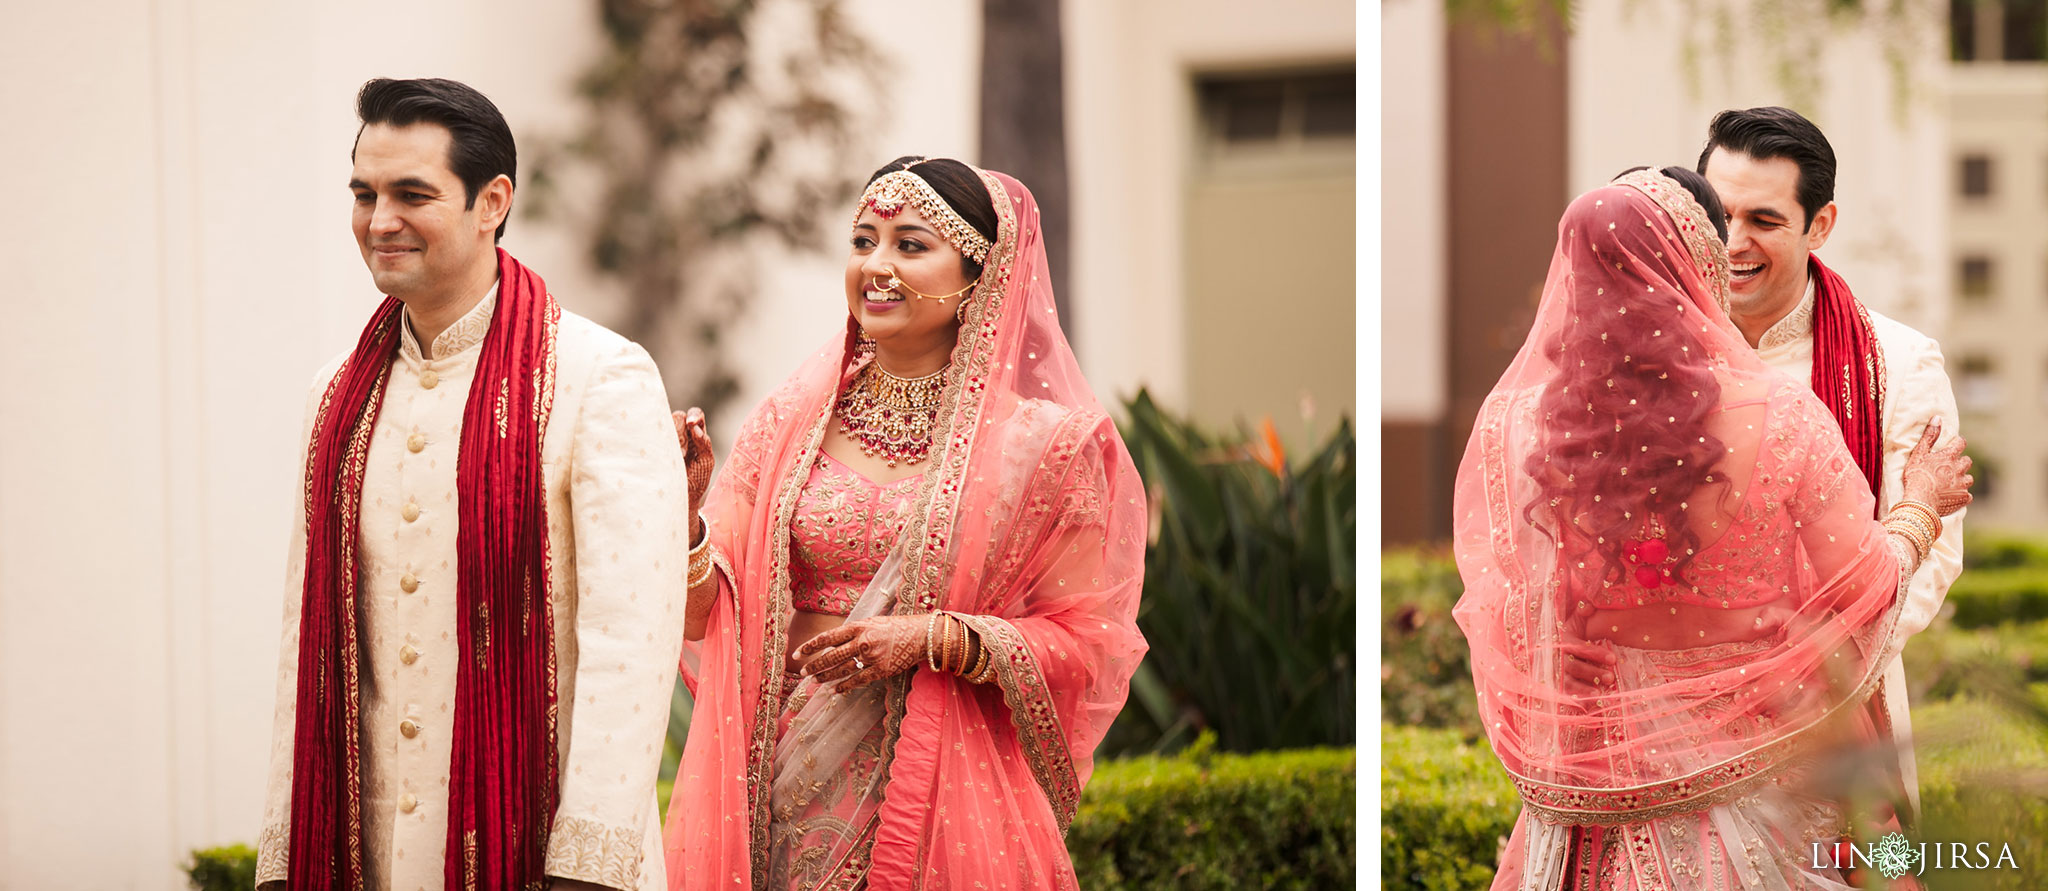 13 Union Station Los Angeles Indian Wedding Photography